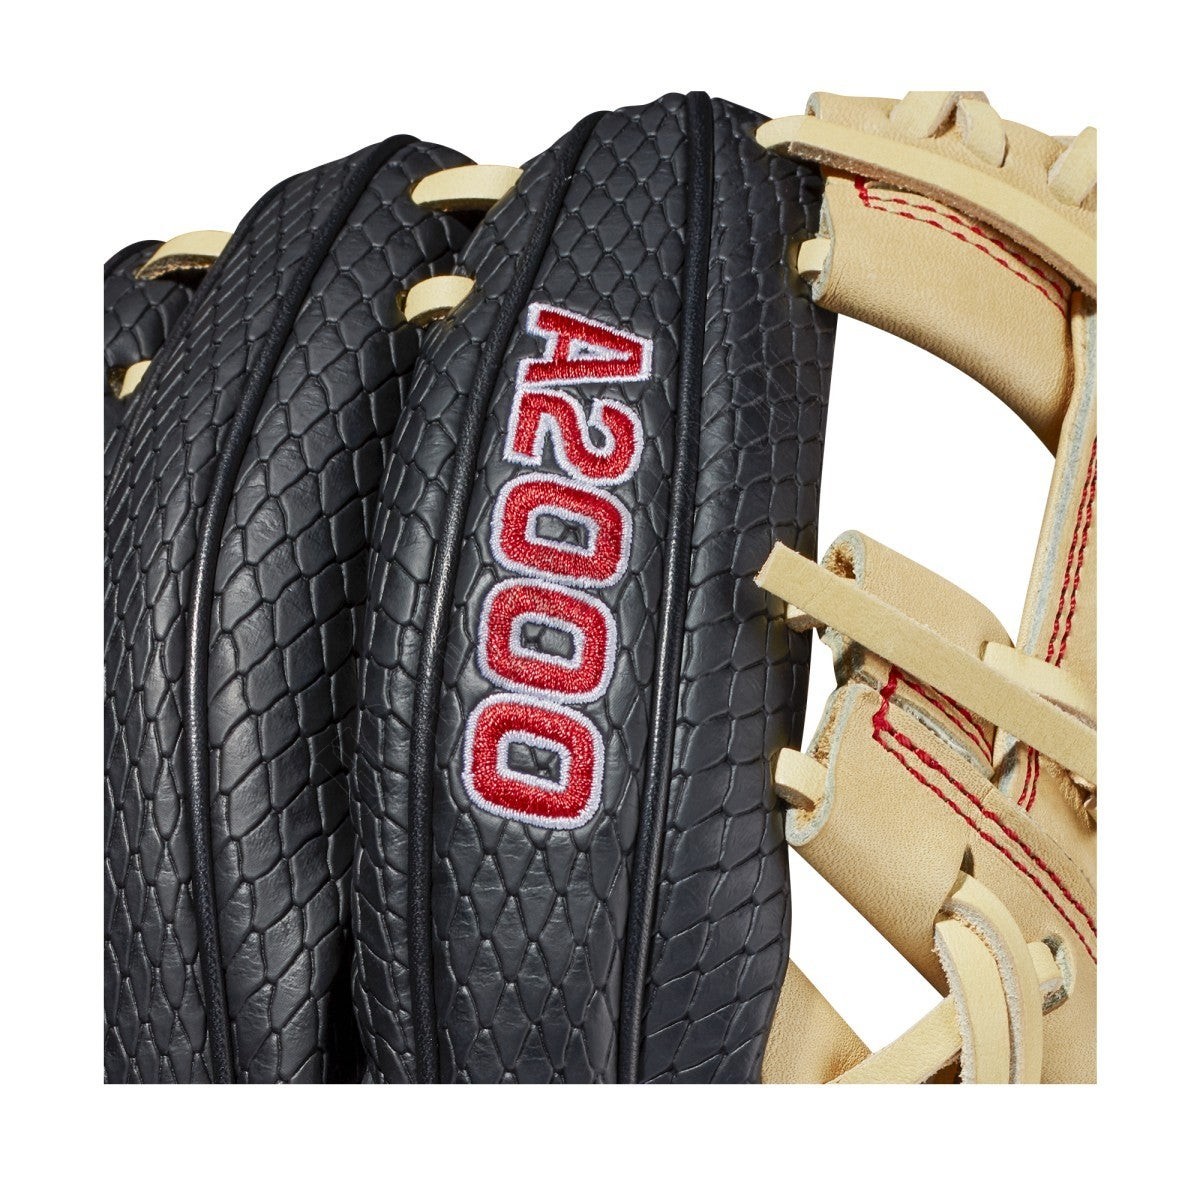 2021 A2000 PF88SS 11.25" Pedroia Fit Infield Baseball Glove ● Wilson Promotions - -6